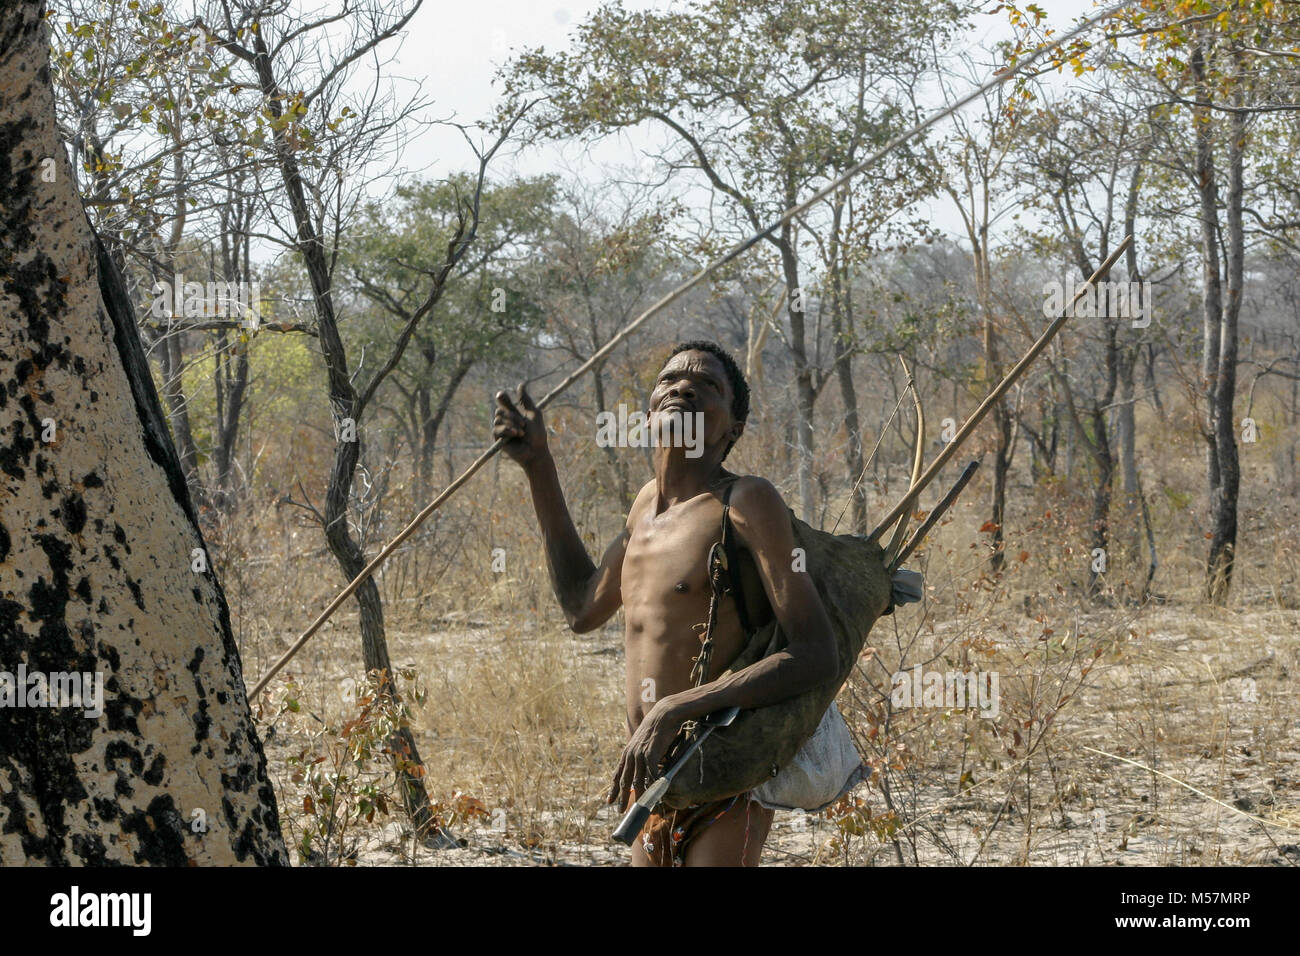 Members of the San Tribe hunting in the surrounding bushland. Stock Photo